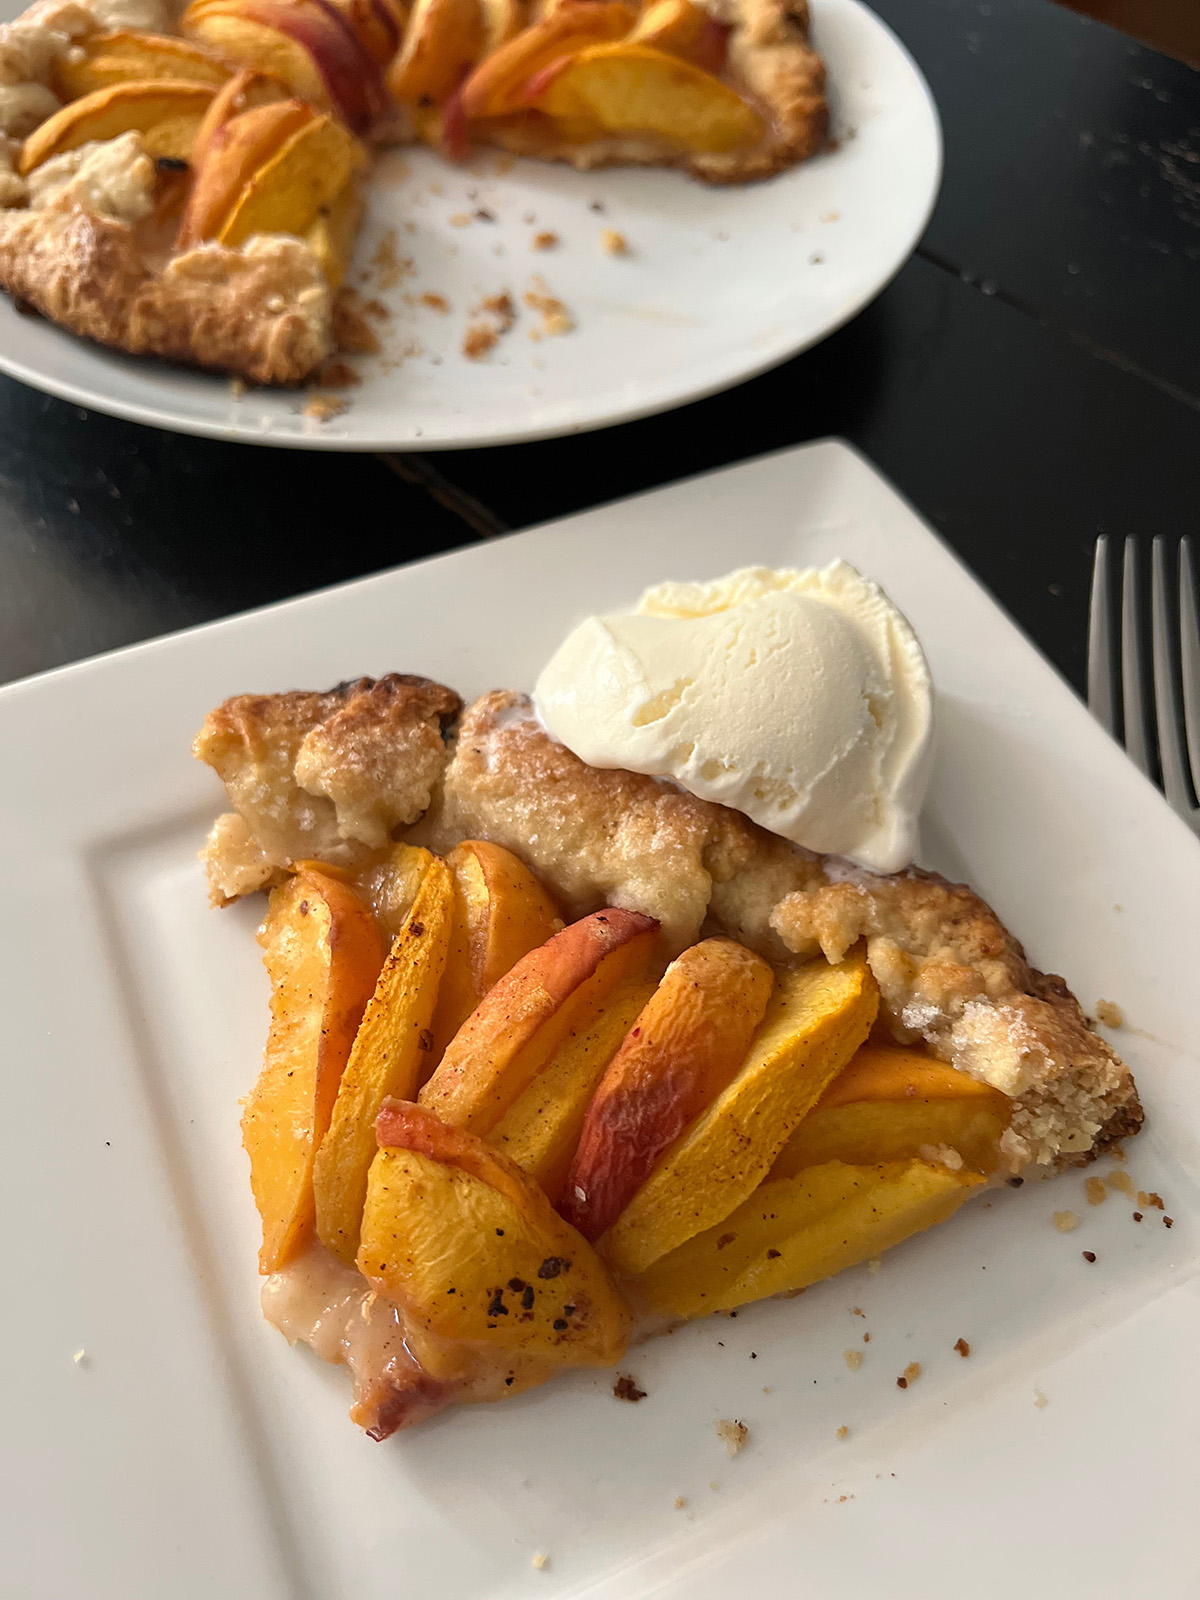 Gretchen’s table: This crostata is easy peachy | Jefferson City News ...